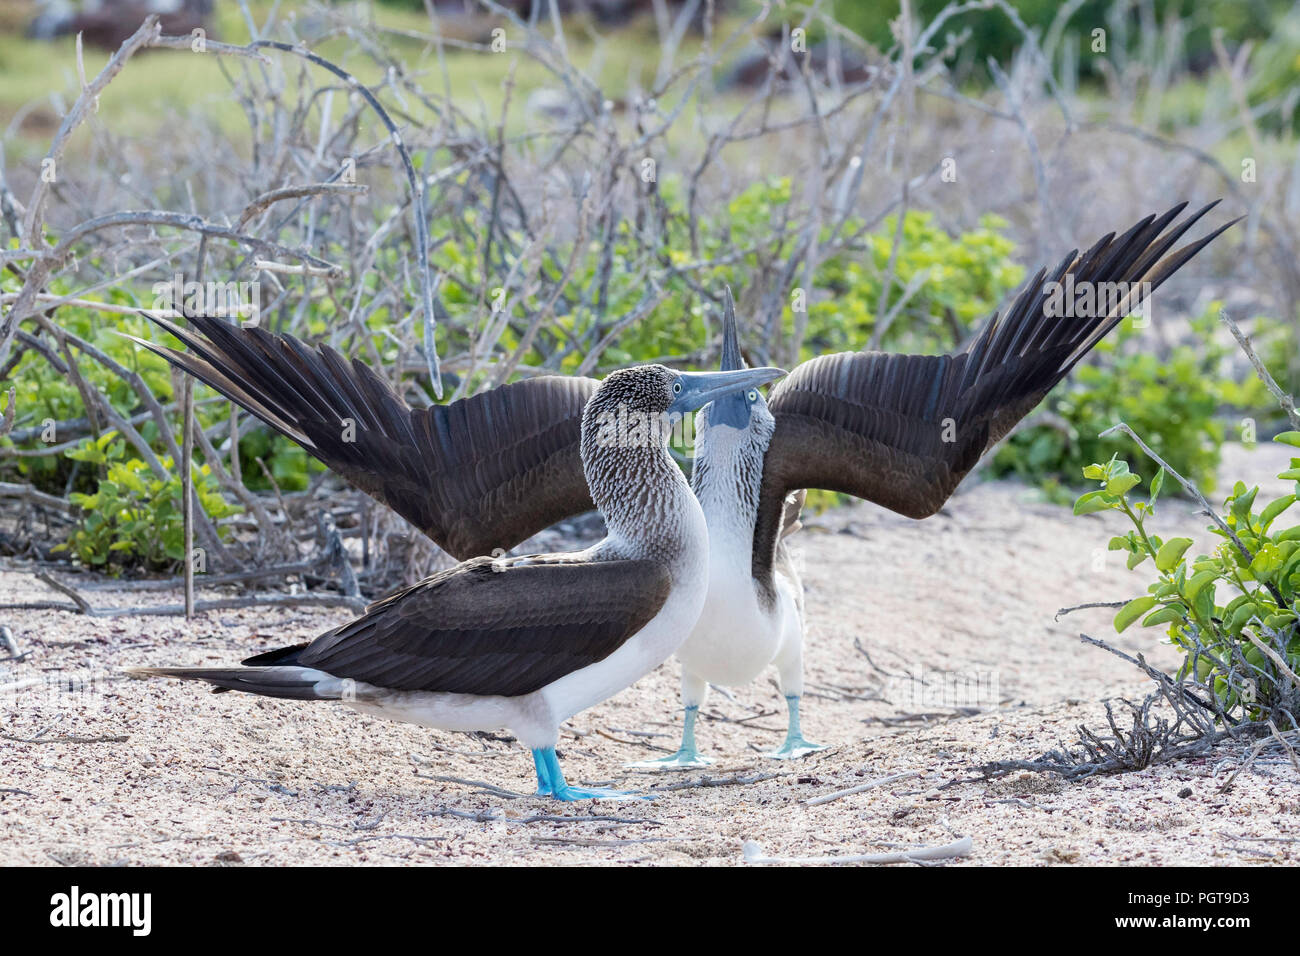 Blue-footed booby, Sula nebouxii, pair in courtship display on North Seymour Island, Galápagos, Ecuador. Stock Photo